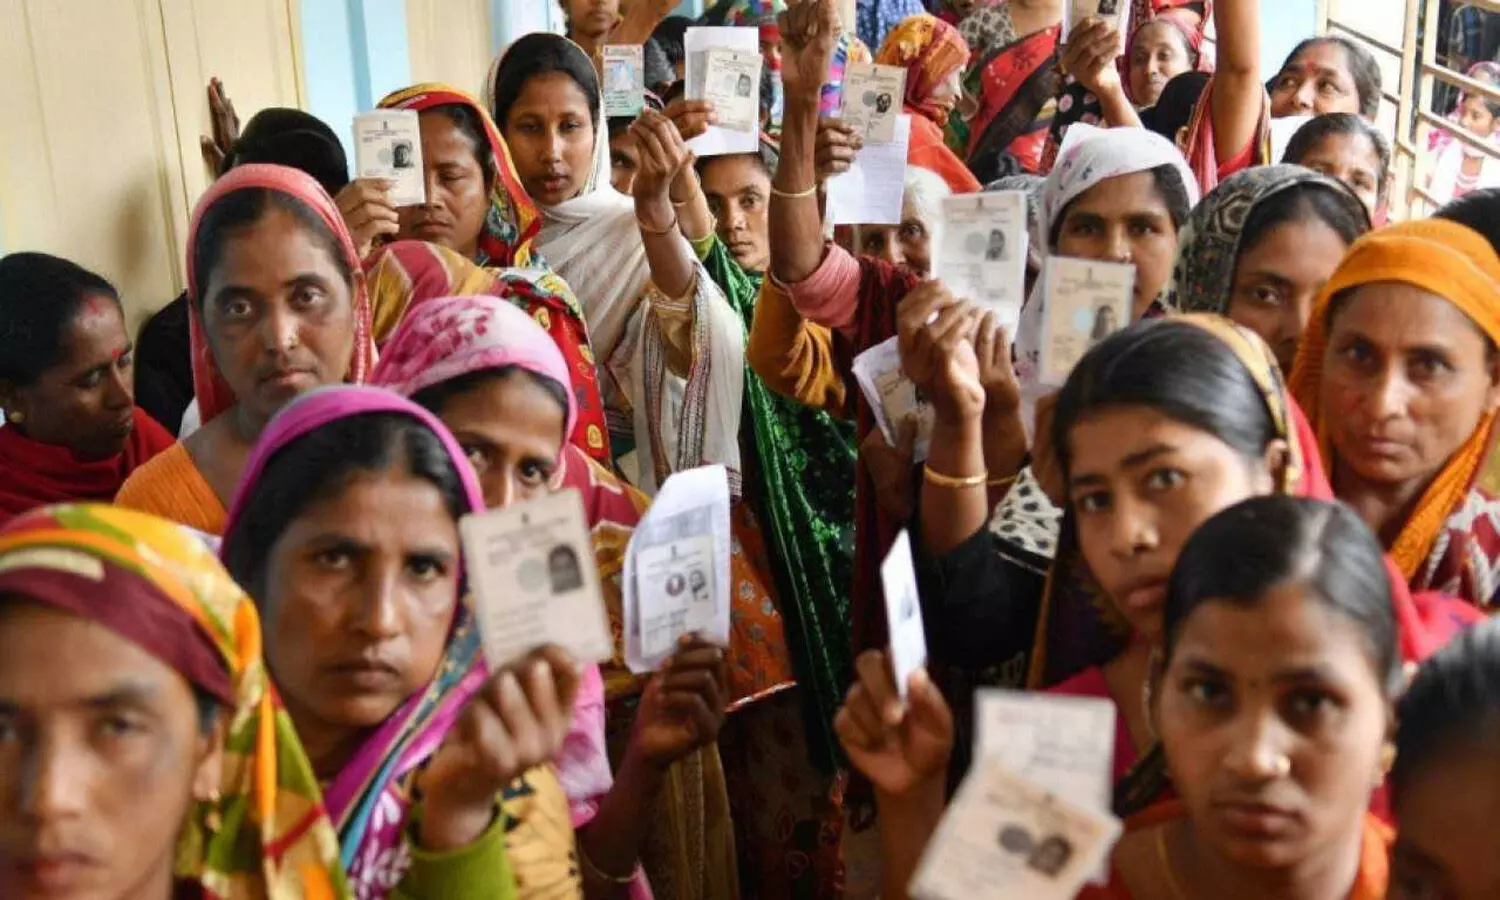 Women voters are going to play an important role in Uttar Pradesh Assembly elections